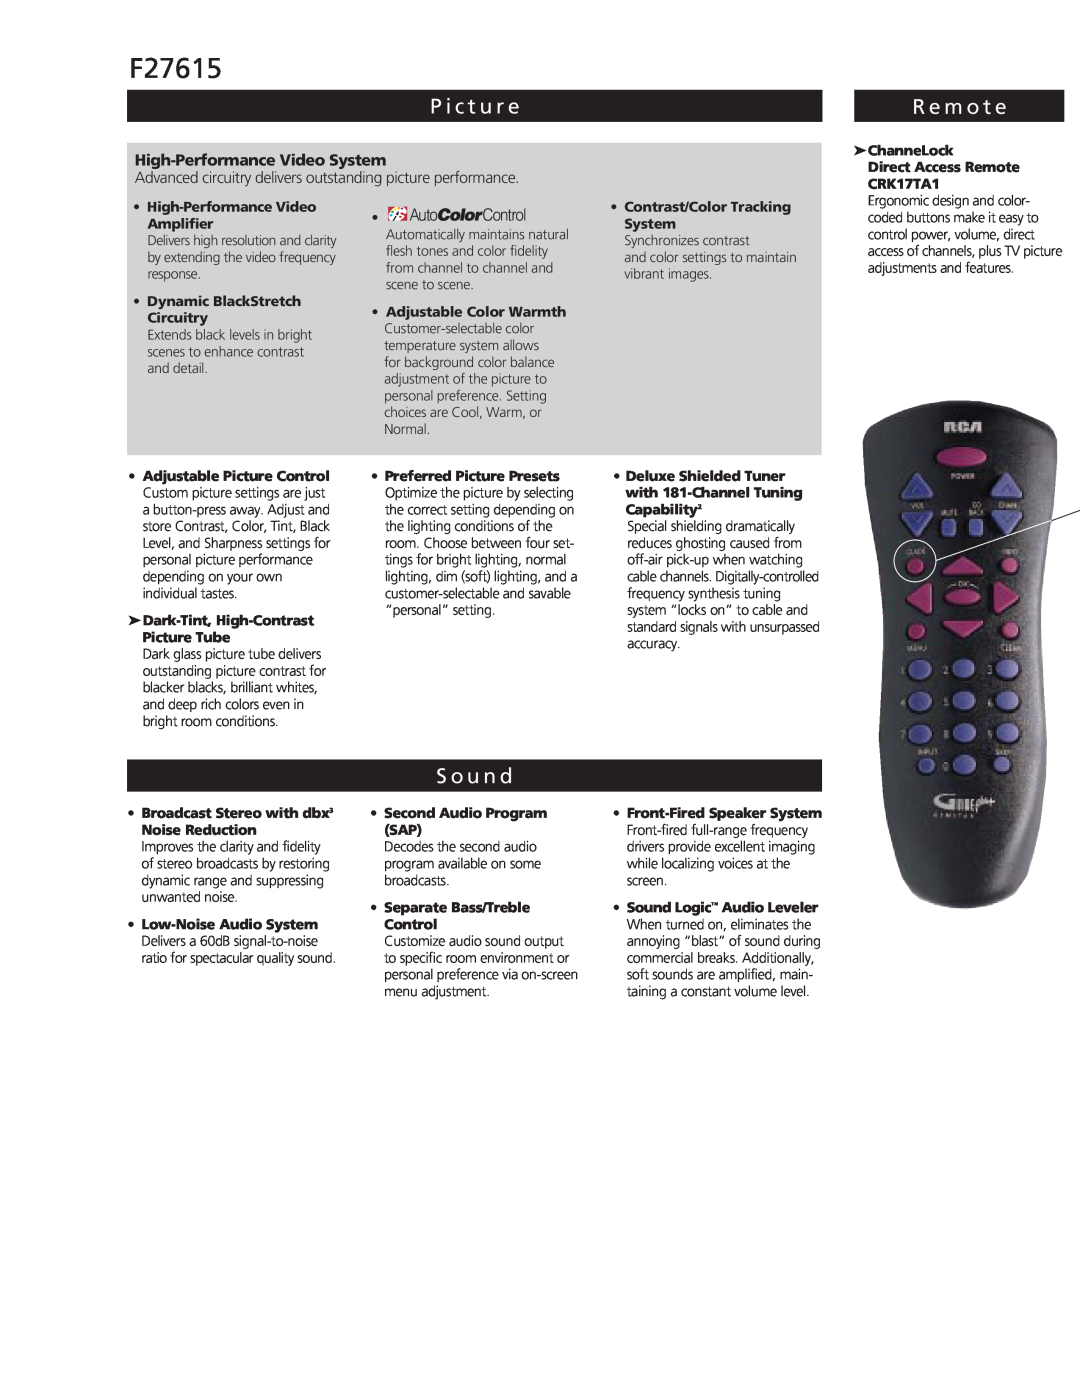 RCA F27615 manual P i c t u r e, R e m o t e, S o u n d, High-Performance Video System 